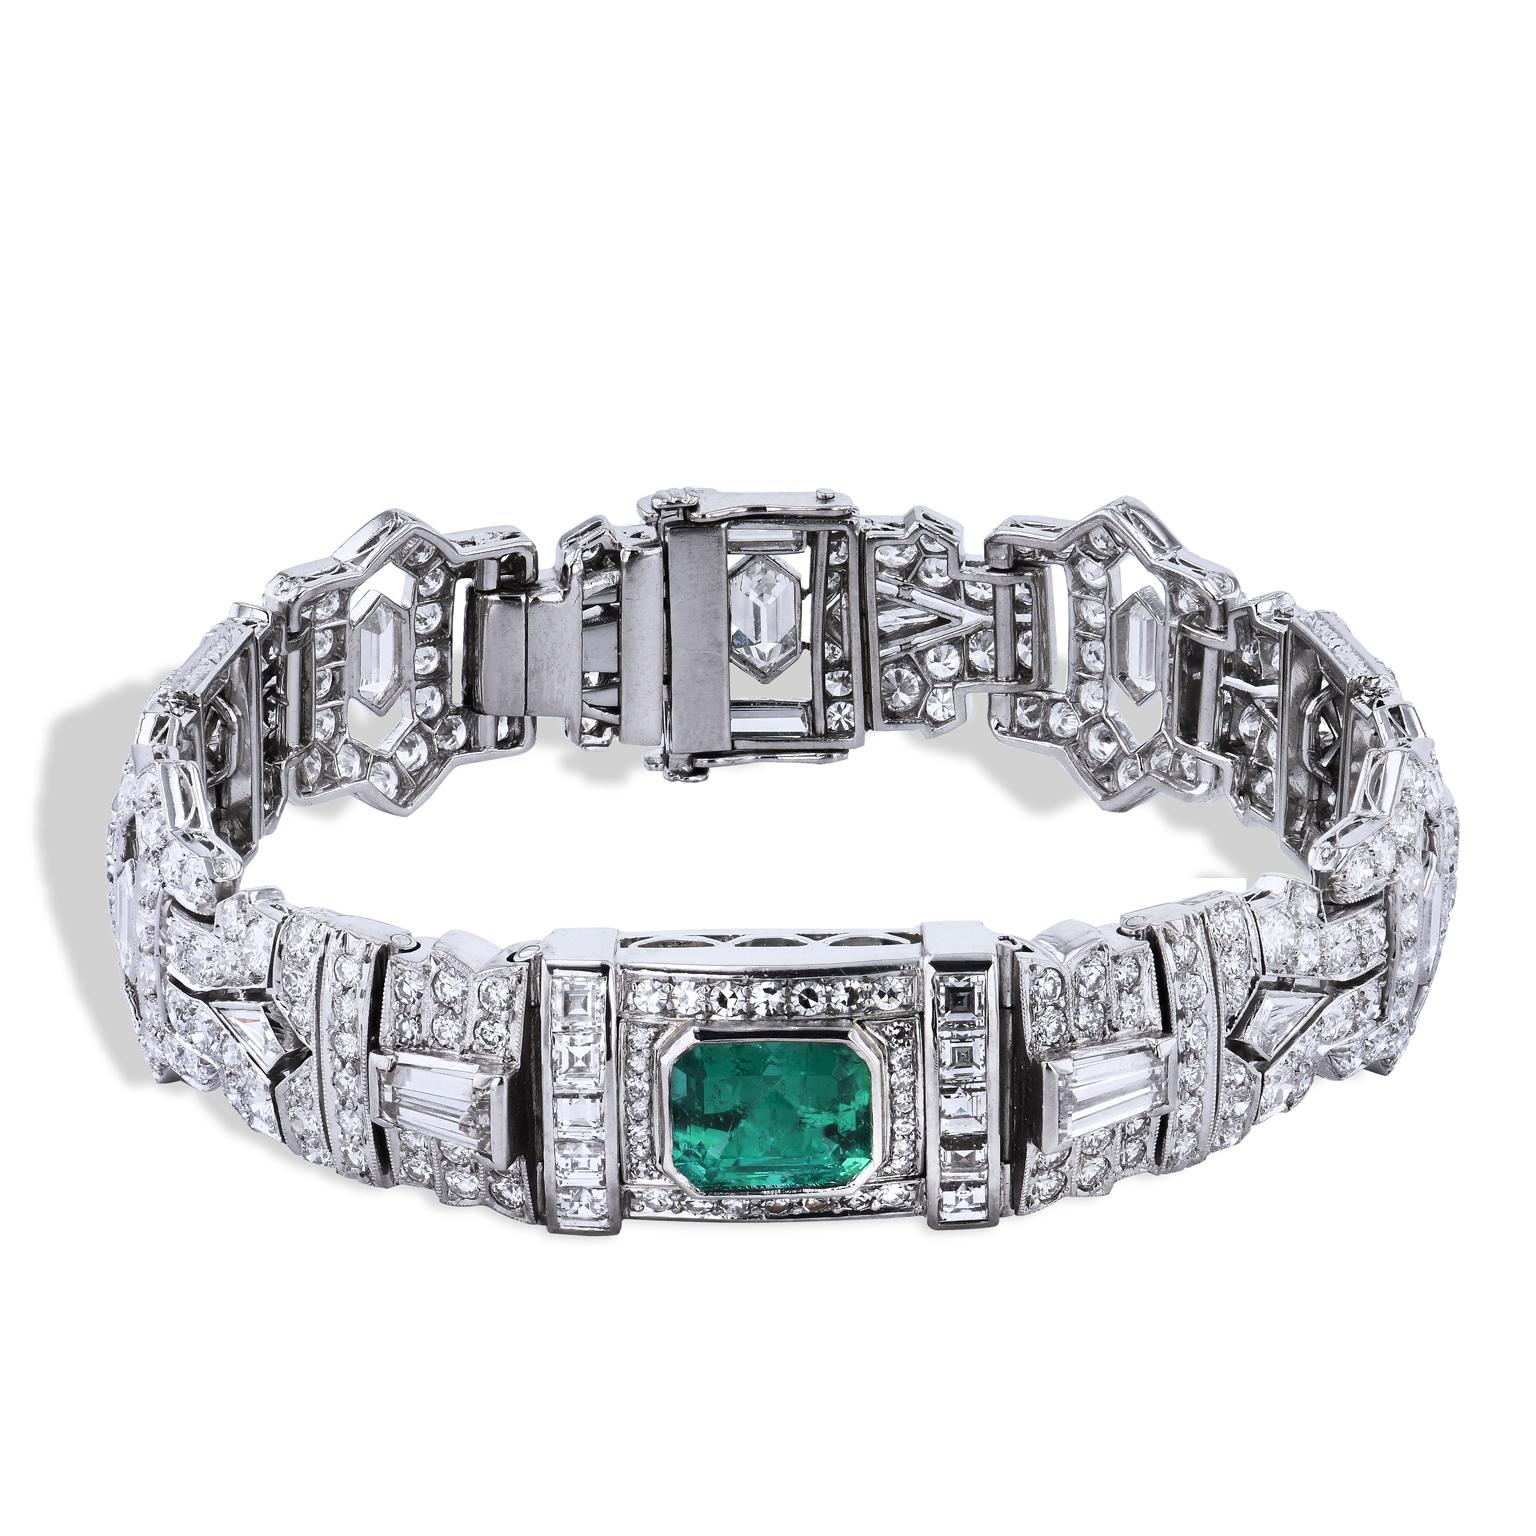 A.G.L. Certified 1.96 Emerald and 16 Carat Diamond Platinum Bracelet Art Deco Style

This stunning Art Deco Style piece used to hold a watch.  
It has been modified by H&H Jewels to hold an amazing A.G.L. Certified 1.96 Colombian Emerald. 
There are